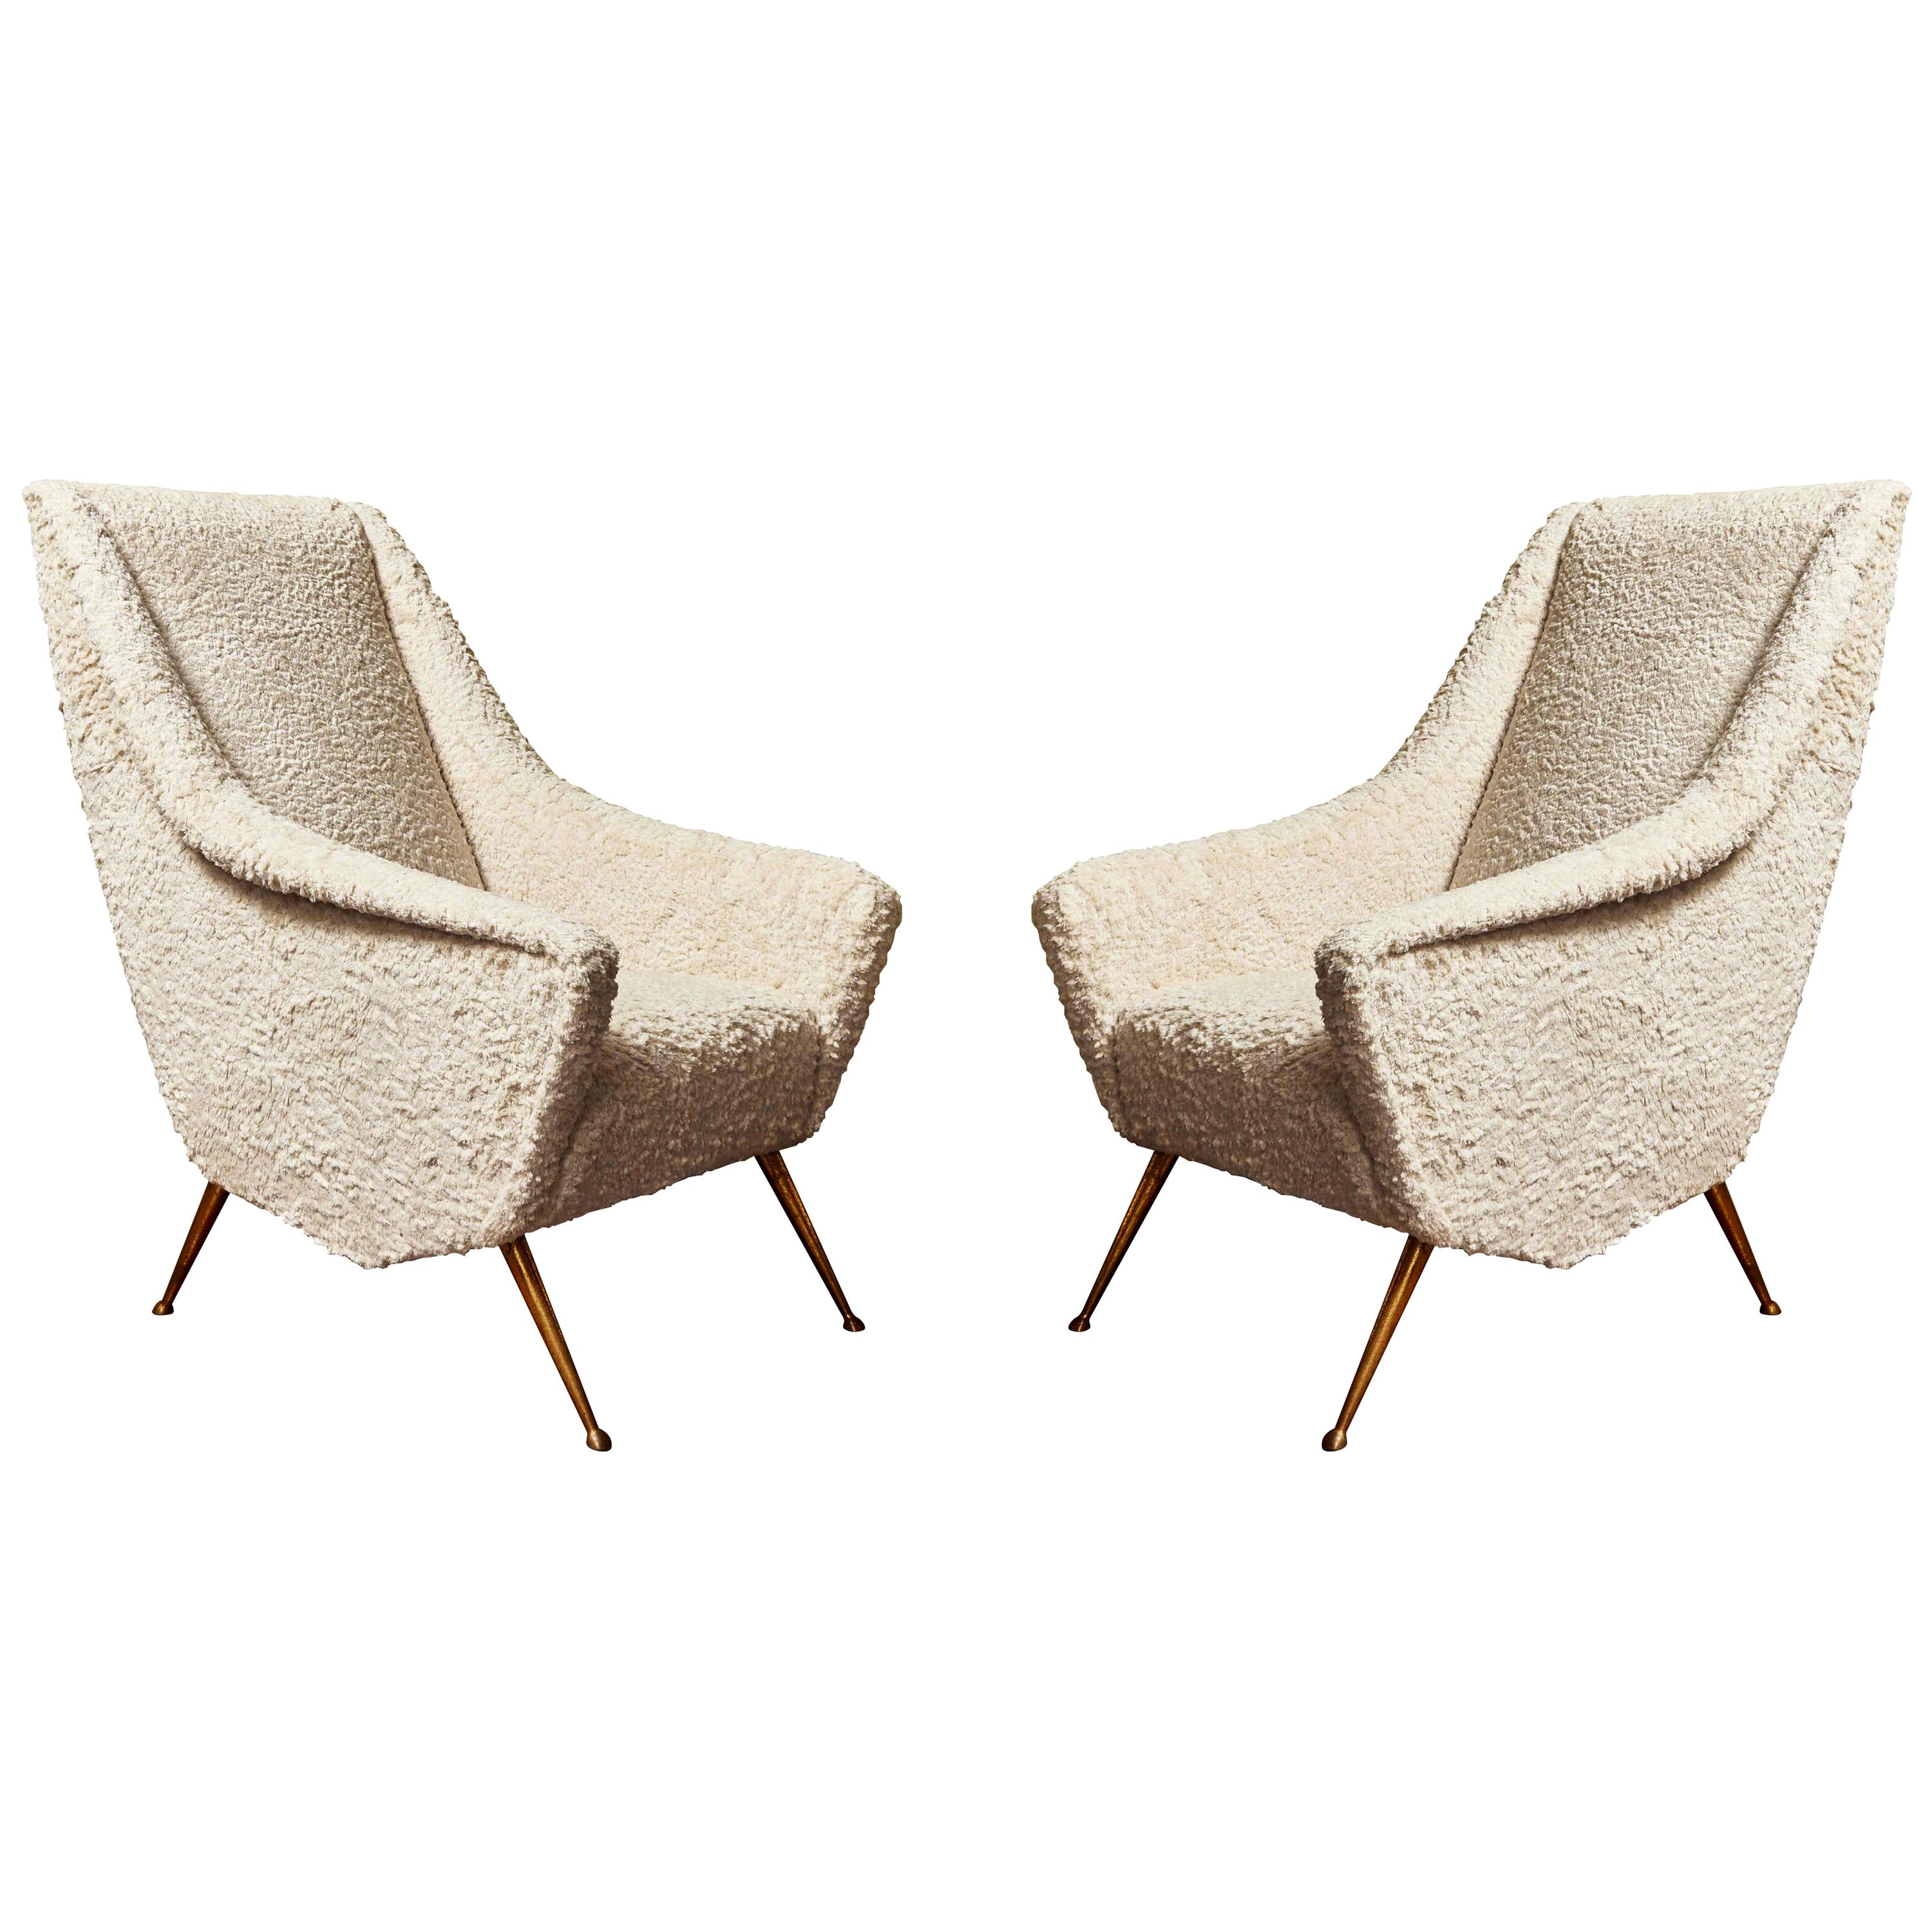 Pair of Vintage Armchairs with Loro Piana Fabric, 1970s